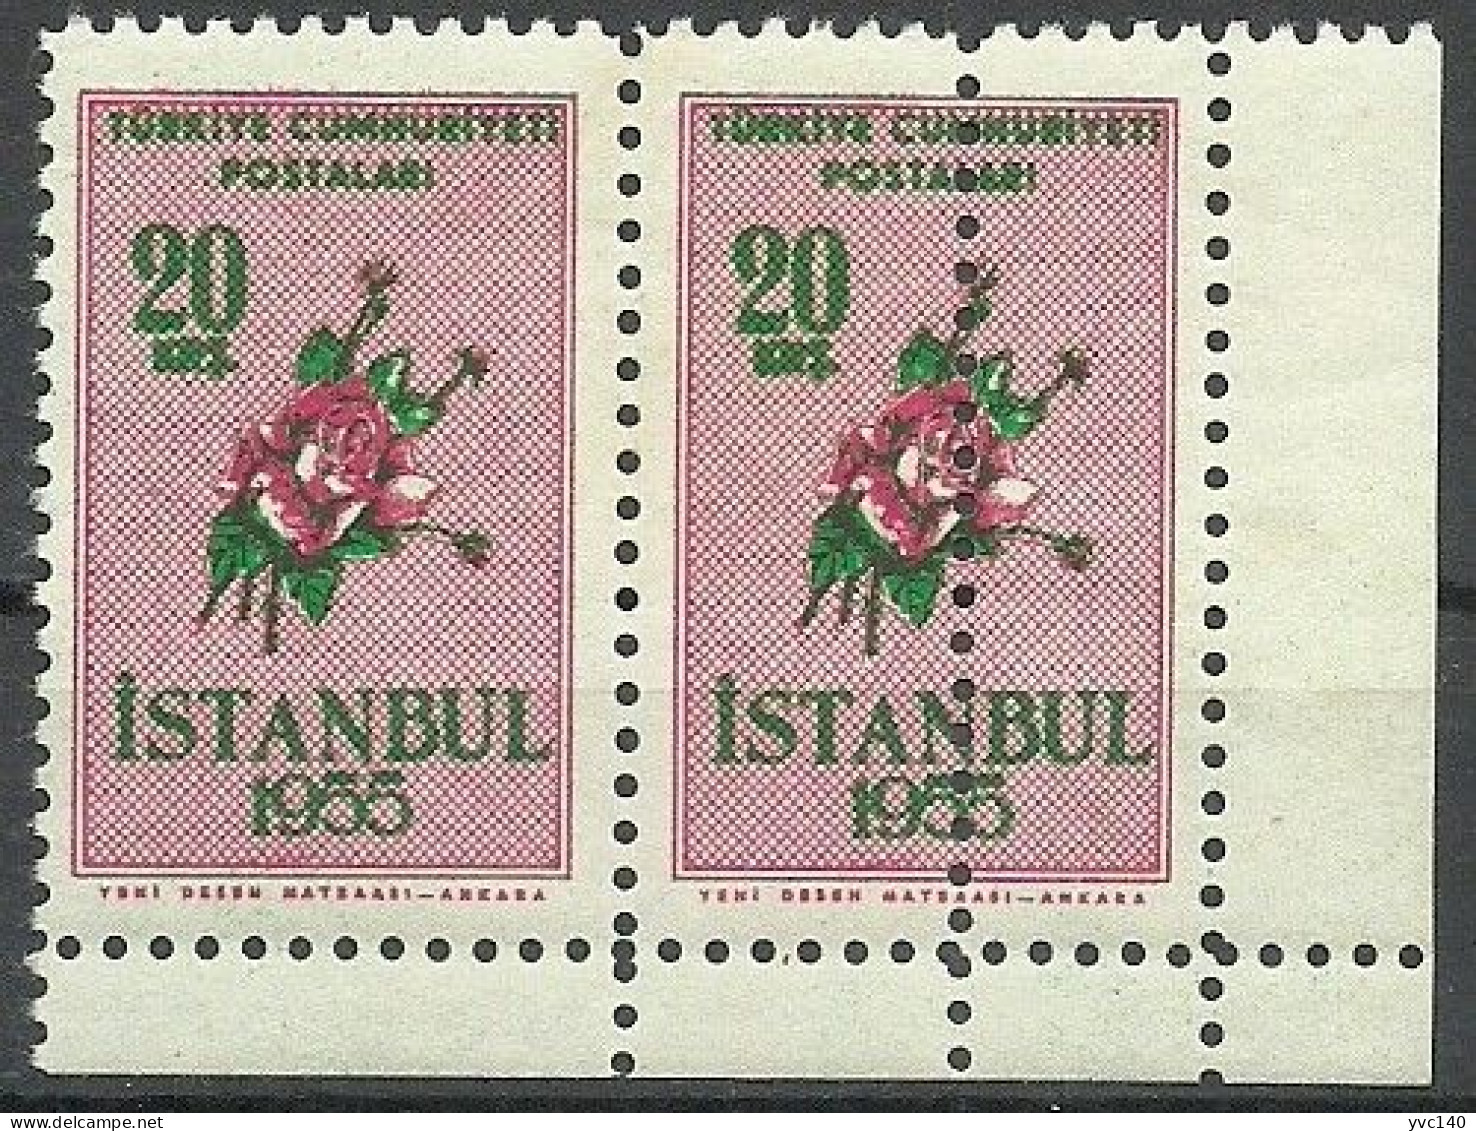 Turkey; 1955 Istanbul Spring And Flower Festivity 20 K. ERROR "Double Perf." - Unused Stamps